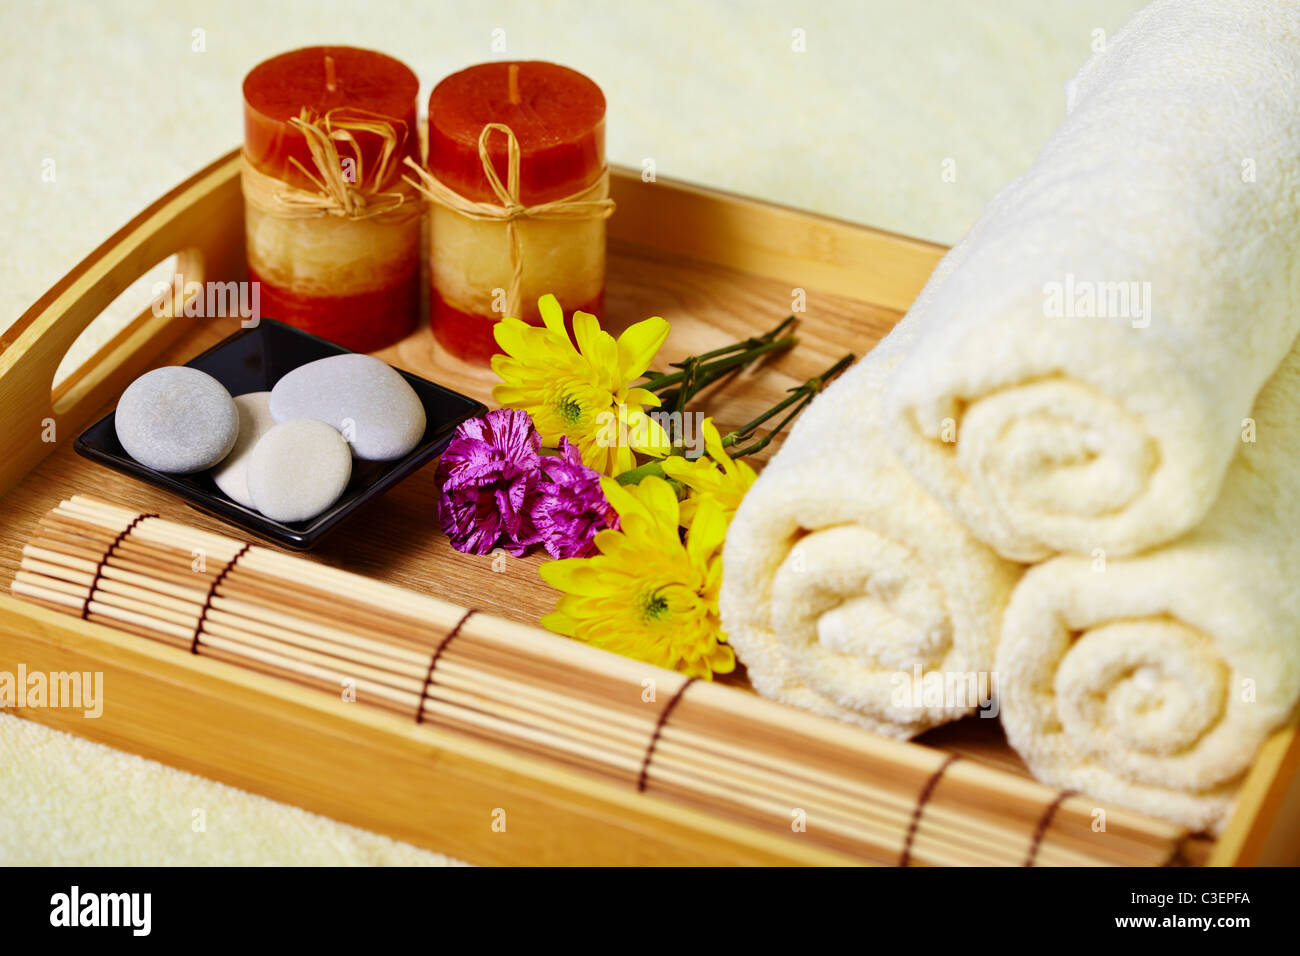 Still life on the spa. A tray of towels, candles and pebbles Stock Photo